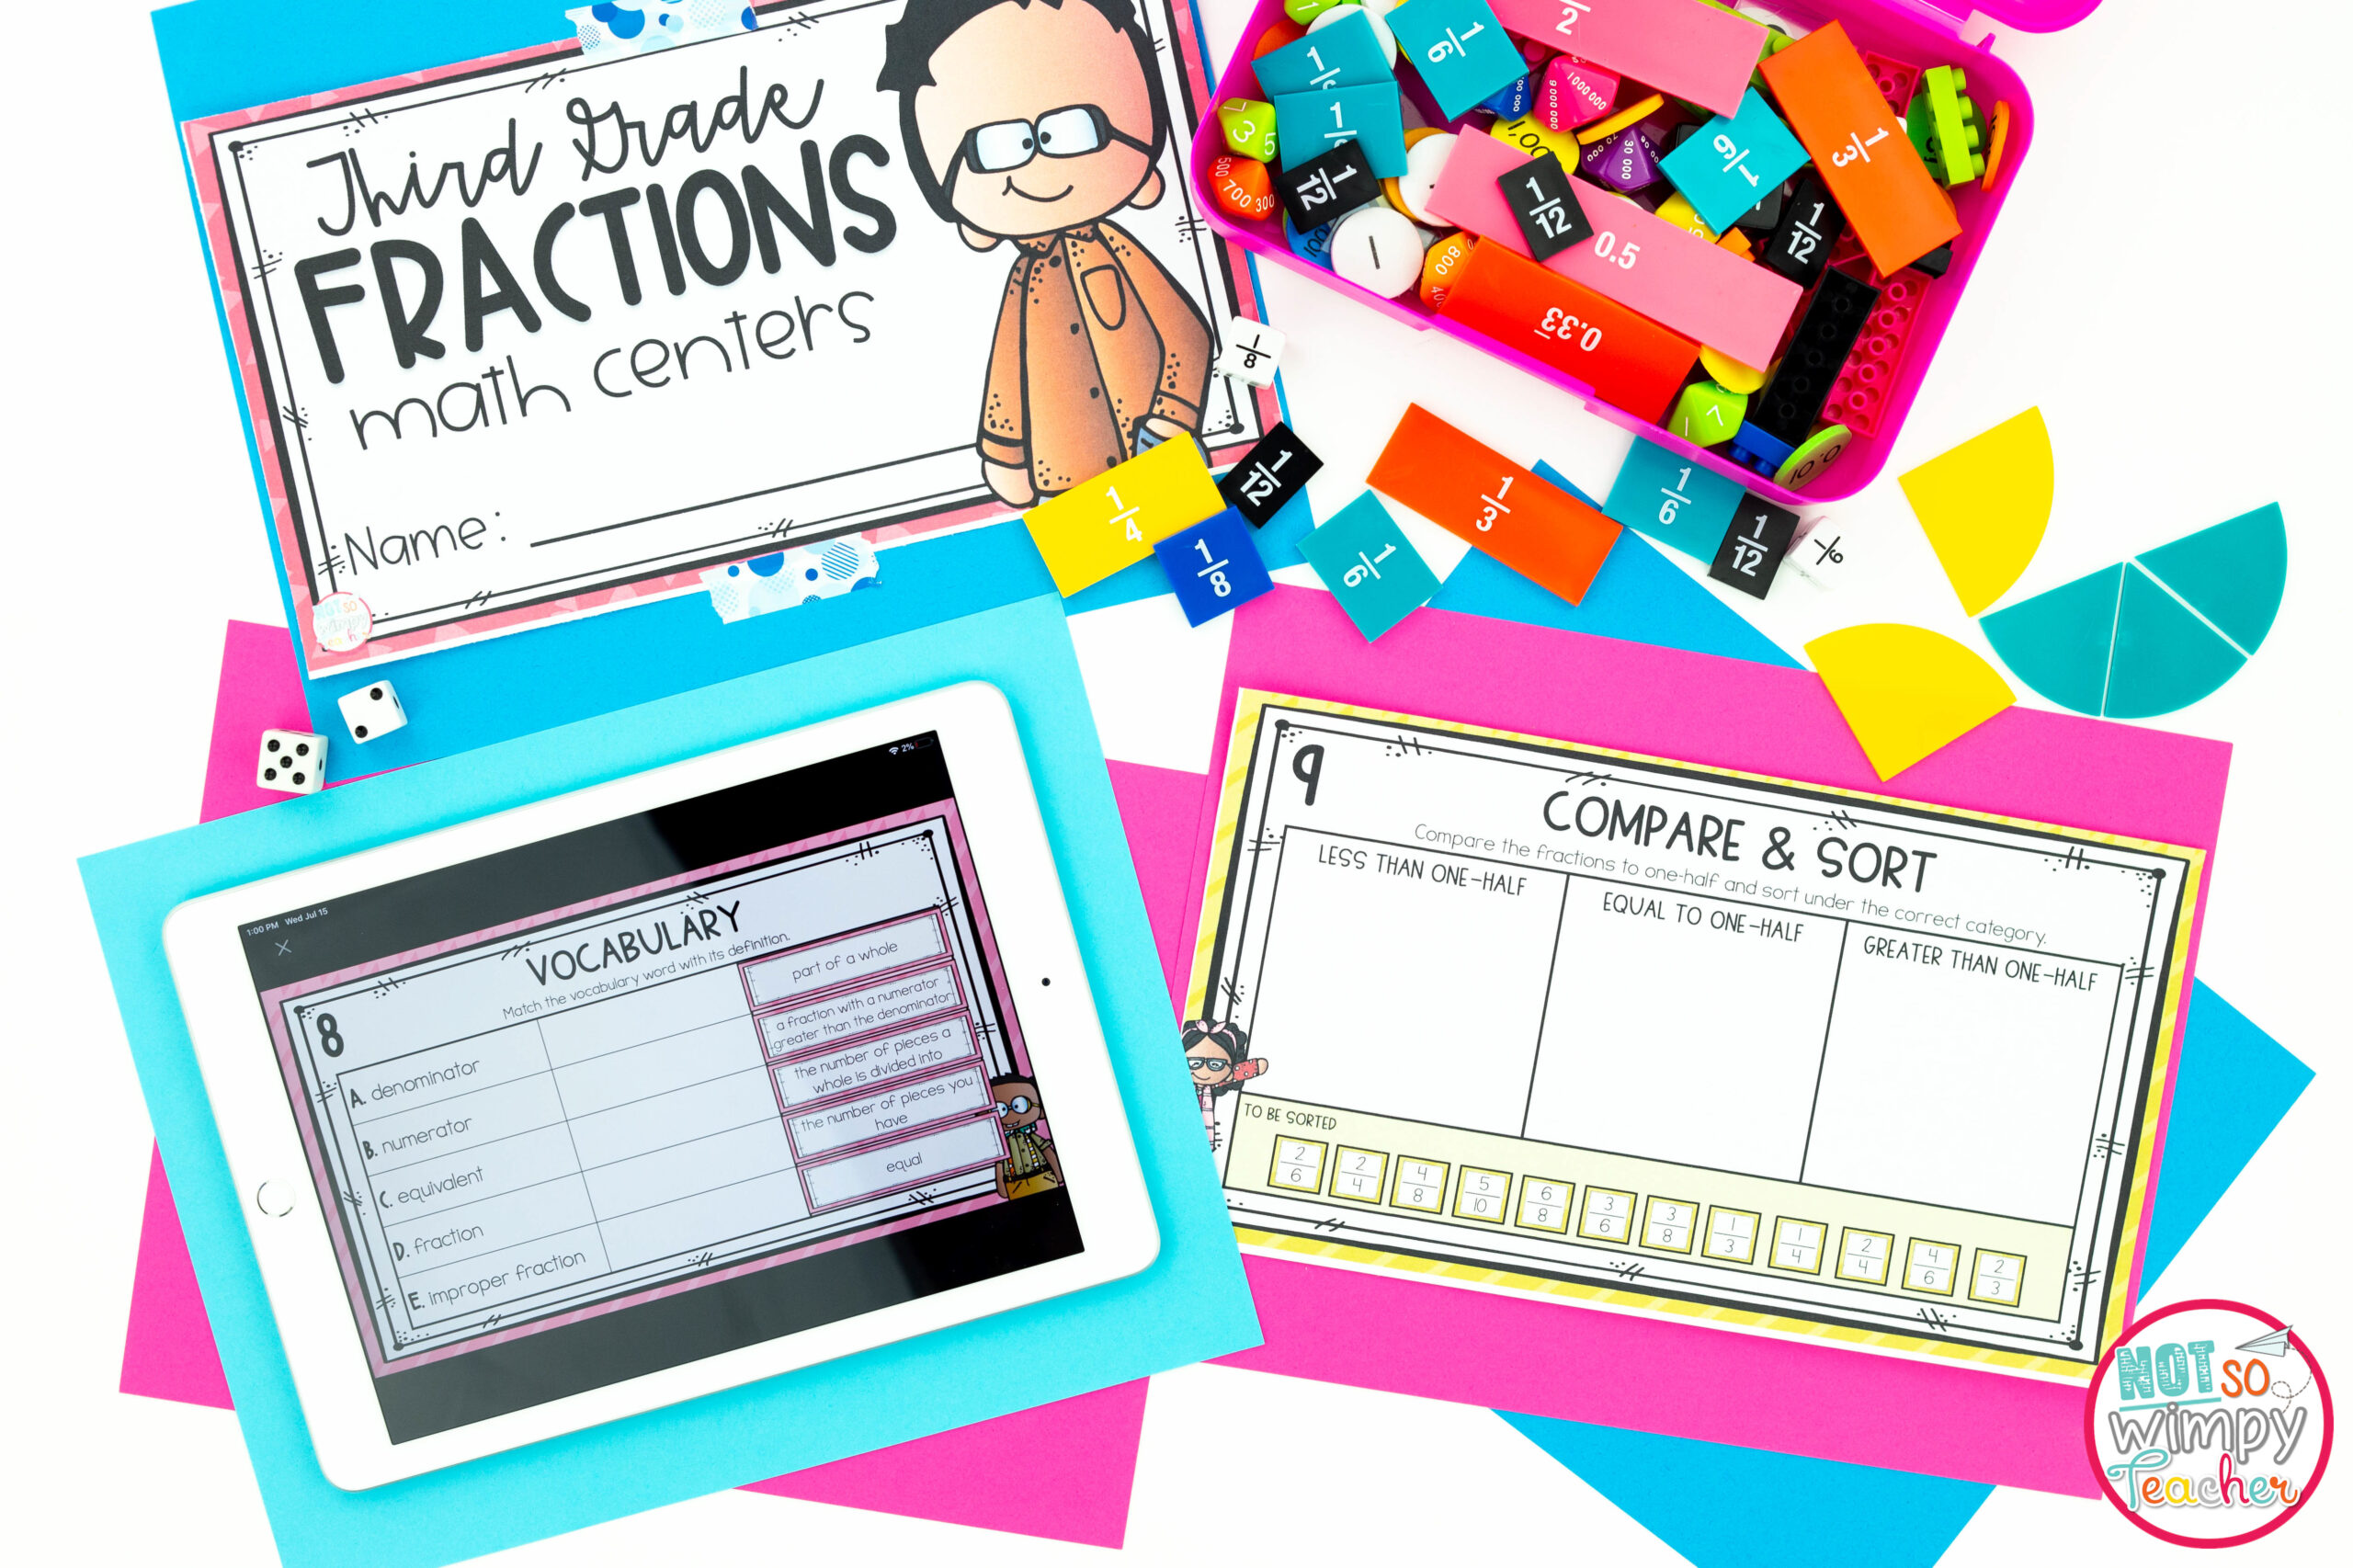 Image shows a digital and paper version of a math center with manipulatives. Manipulatives are great to use in math centers.